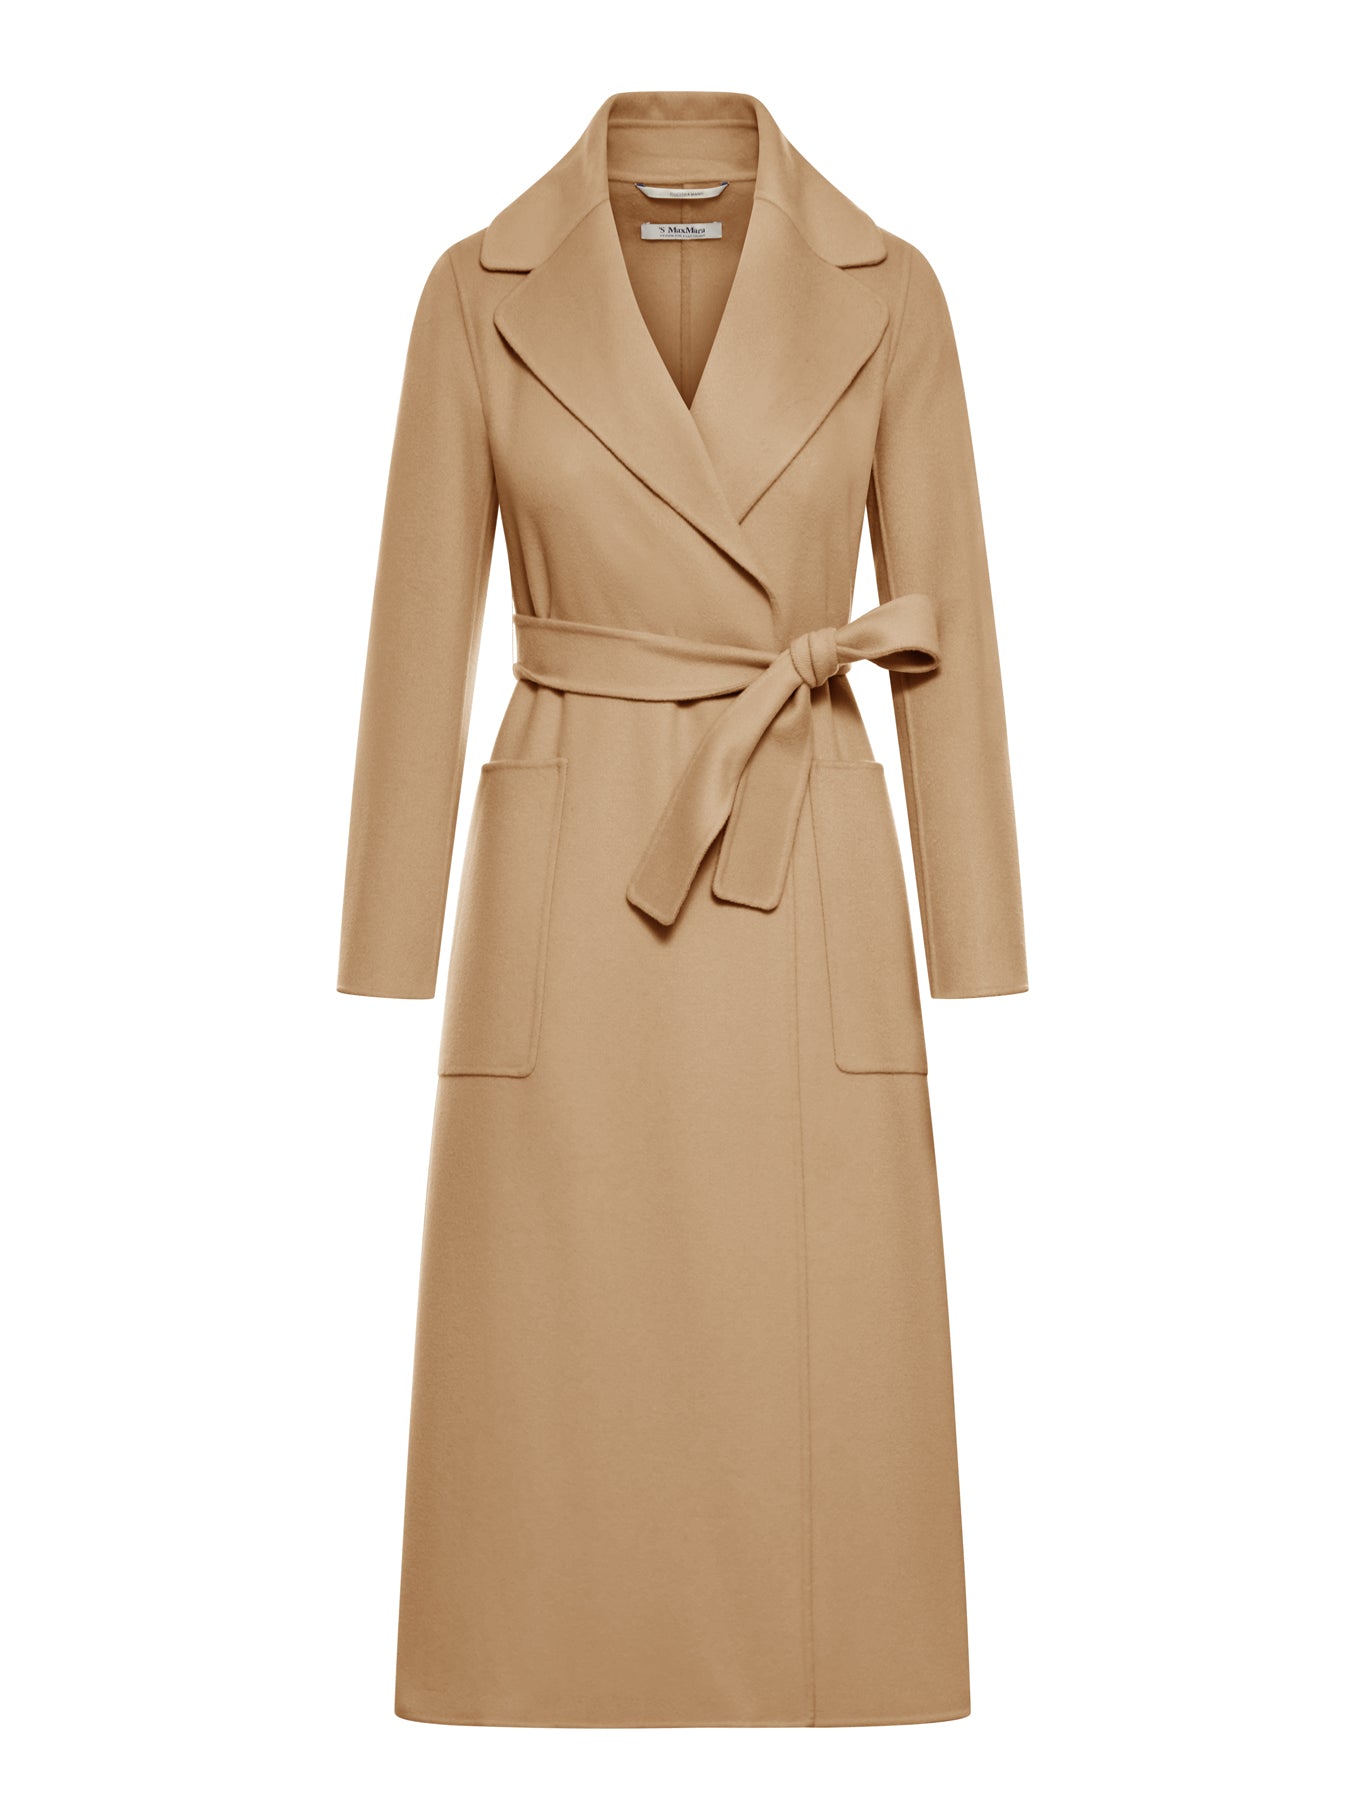 PAOLORE wool wrap coat